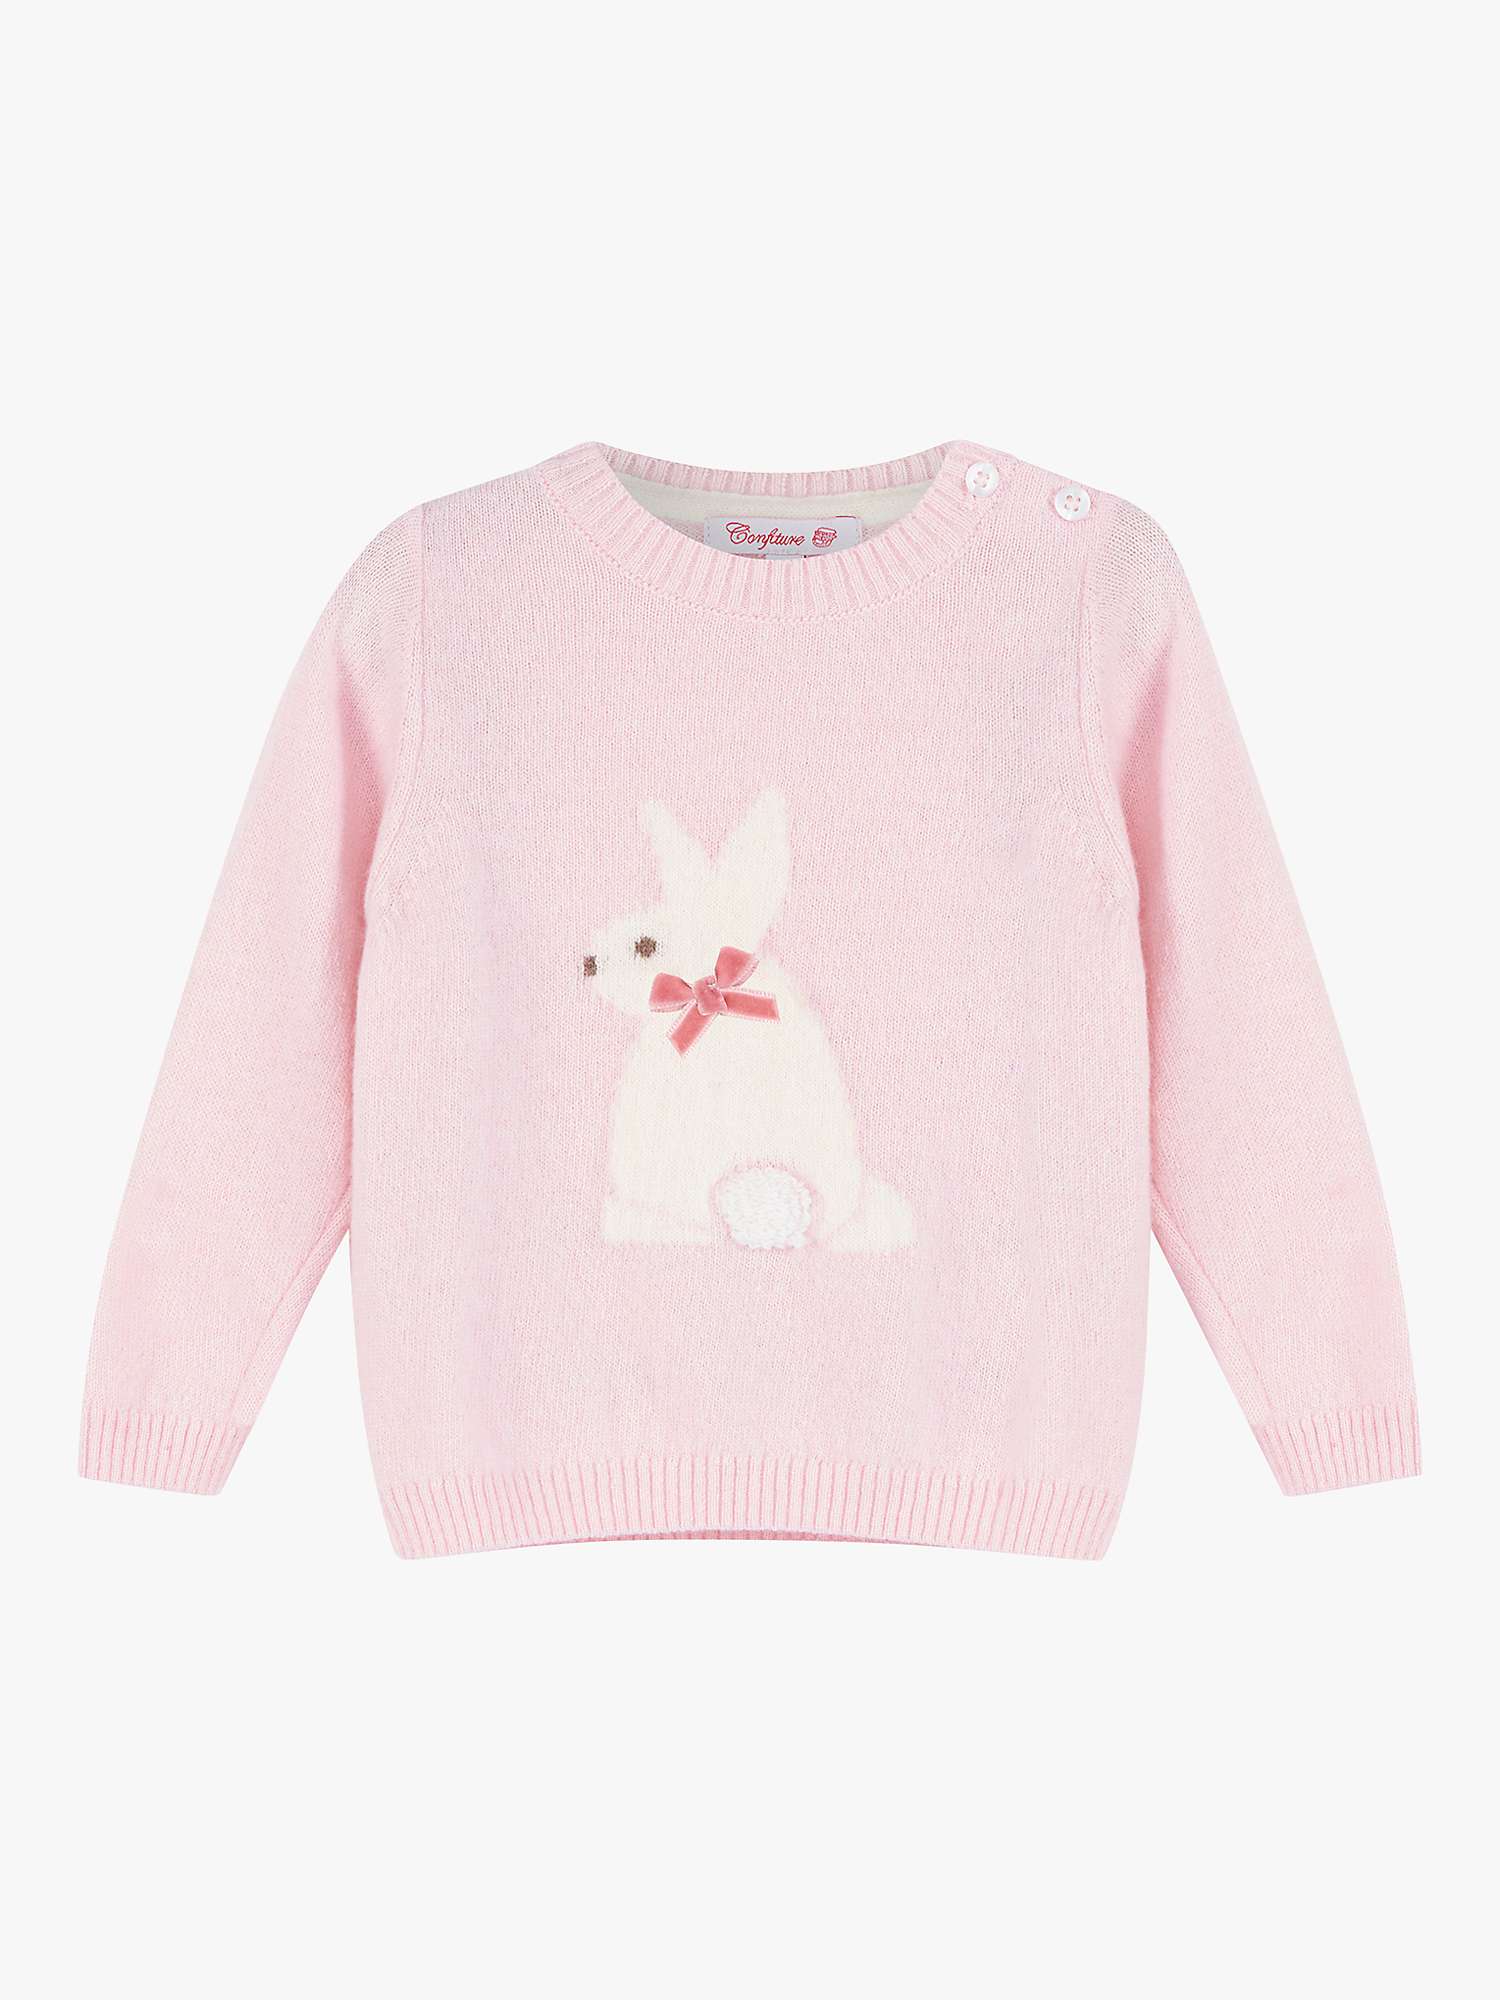 Trotters Baby Bunny Cashmere Blend Jumper, Pale Pink at John Lewis ...